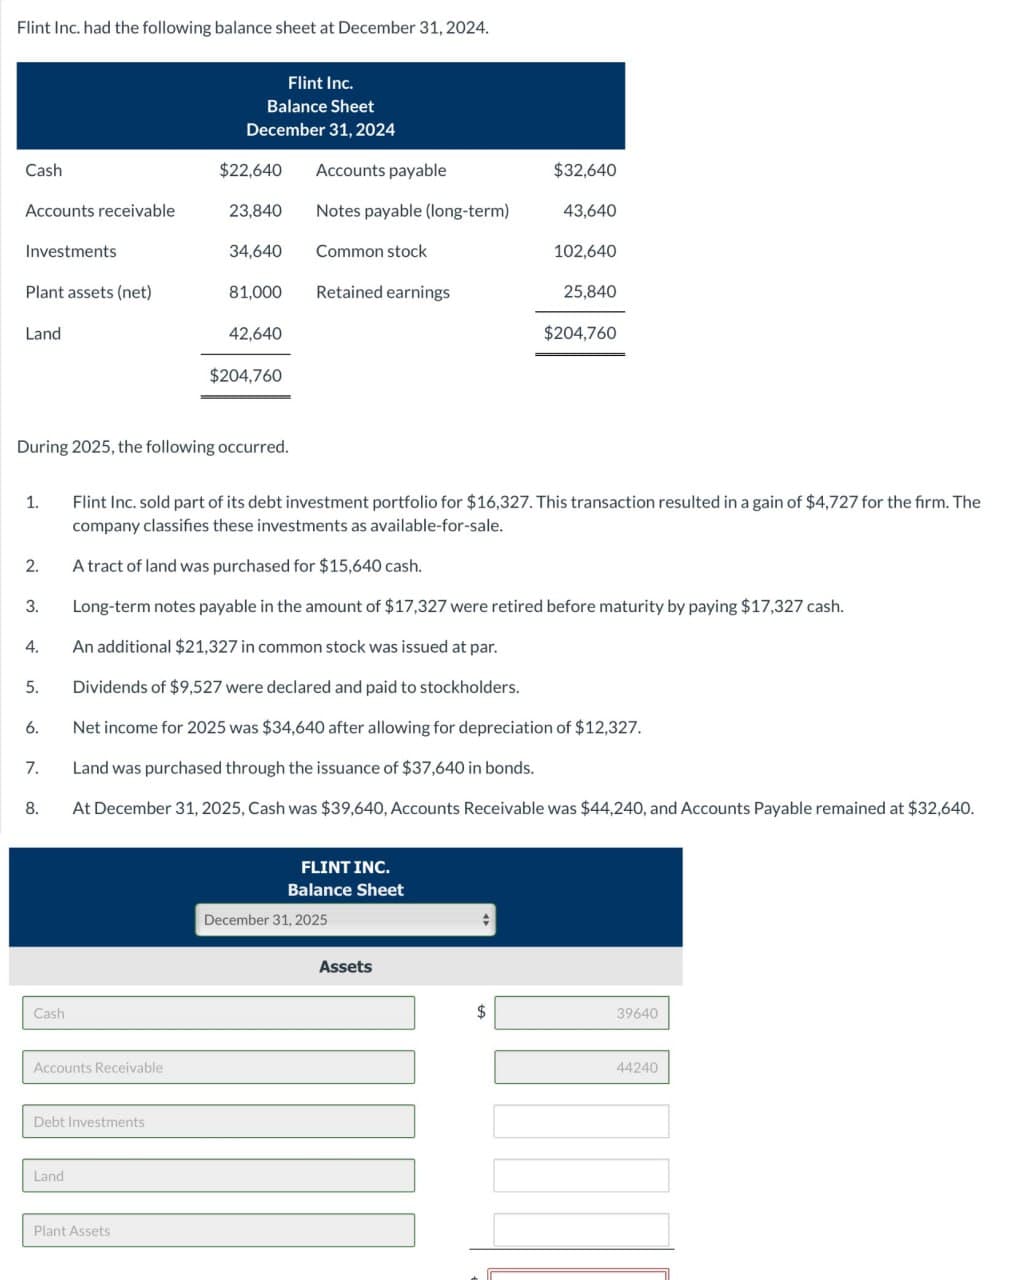 Flint Inc. had the following balance sheet at December 31, 2024.
Cash
Accounts receivable
Investments
Plant assets (net)
Land
1.
2.
3.
4.
5.
6.
During 2025, the following occurred.
7.
8.
Cash
Accounts Receivable
Debt Investments
Land
Flint Inc.
Balance Sheet
December 31, 2024
$22,640 Accounts payable
Plant Assets
23,840
34,640
81,000
42,640
$204,760
Notes payable (long-term)
Common stock
Retained earnings
FLINT INC.
Balance Sheet
Flint Inc. sold part of its debt investment portfolio for $16,327. This transaction resulted in a gain of $4,727 for the firm. The
company classifies these investments as available-for-sale.
A tract of land was purchased for $15,640 cash.
Long-term notes payable in the amount of $17,327 were retired before maturity by paying $17,327 cash.
An additional $21,327 in common stock was issued at par.
Dividends of $9,527 were declared and paid to stockholders.
Net income for 2025 was $34,640 after allowing for depreciation of $12,327.
Land was purchased through the issuance of $37,640 in bonds.
At December 31, 2025, Cash was $39,640, Accounts Receivable was $44,240, and Accounts Payable remained at $32,640.
December 31, 2025
Assets
+
$32,640
$
43,640
102,640
25,840
$204,760
39640
44240